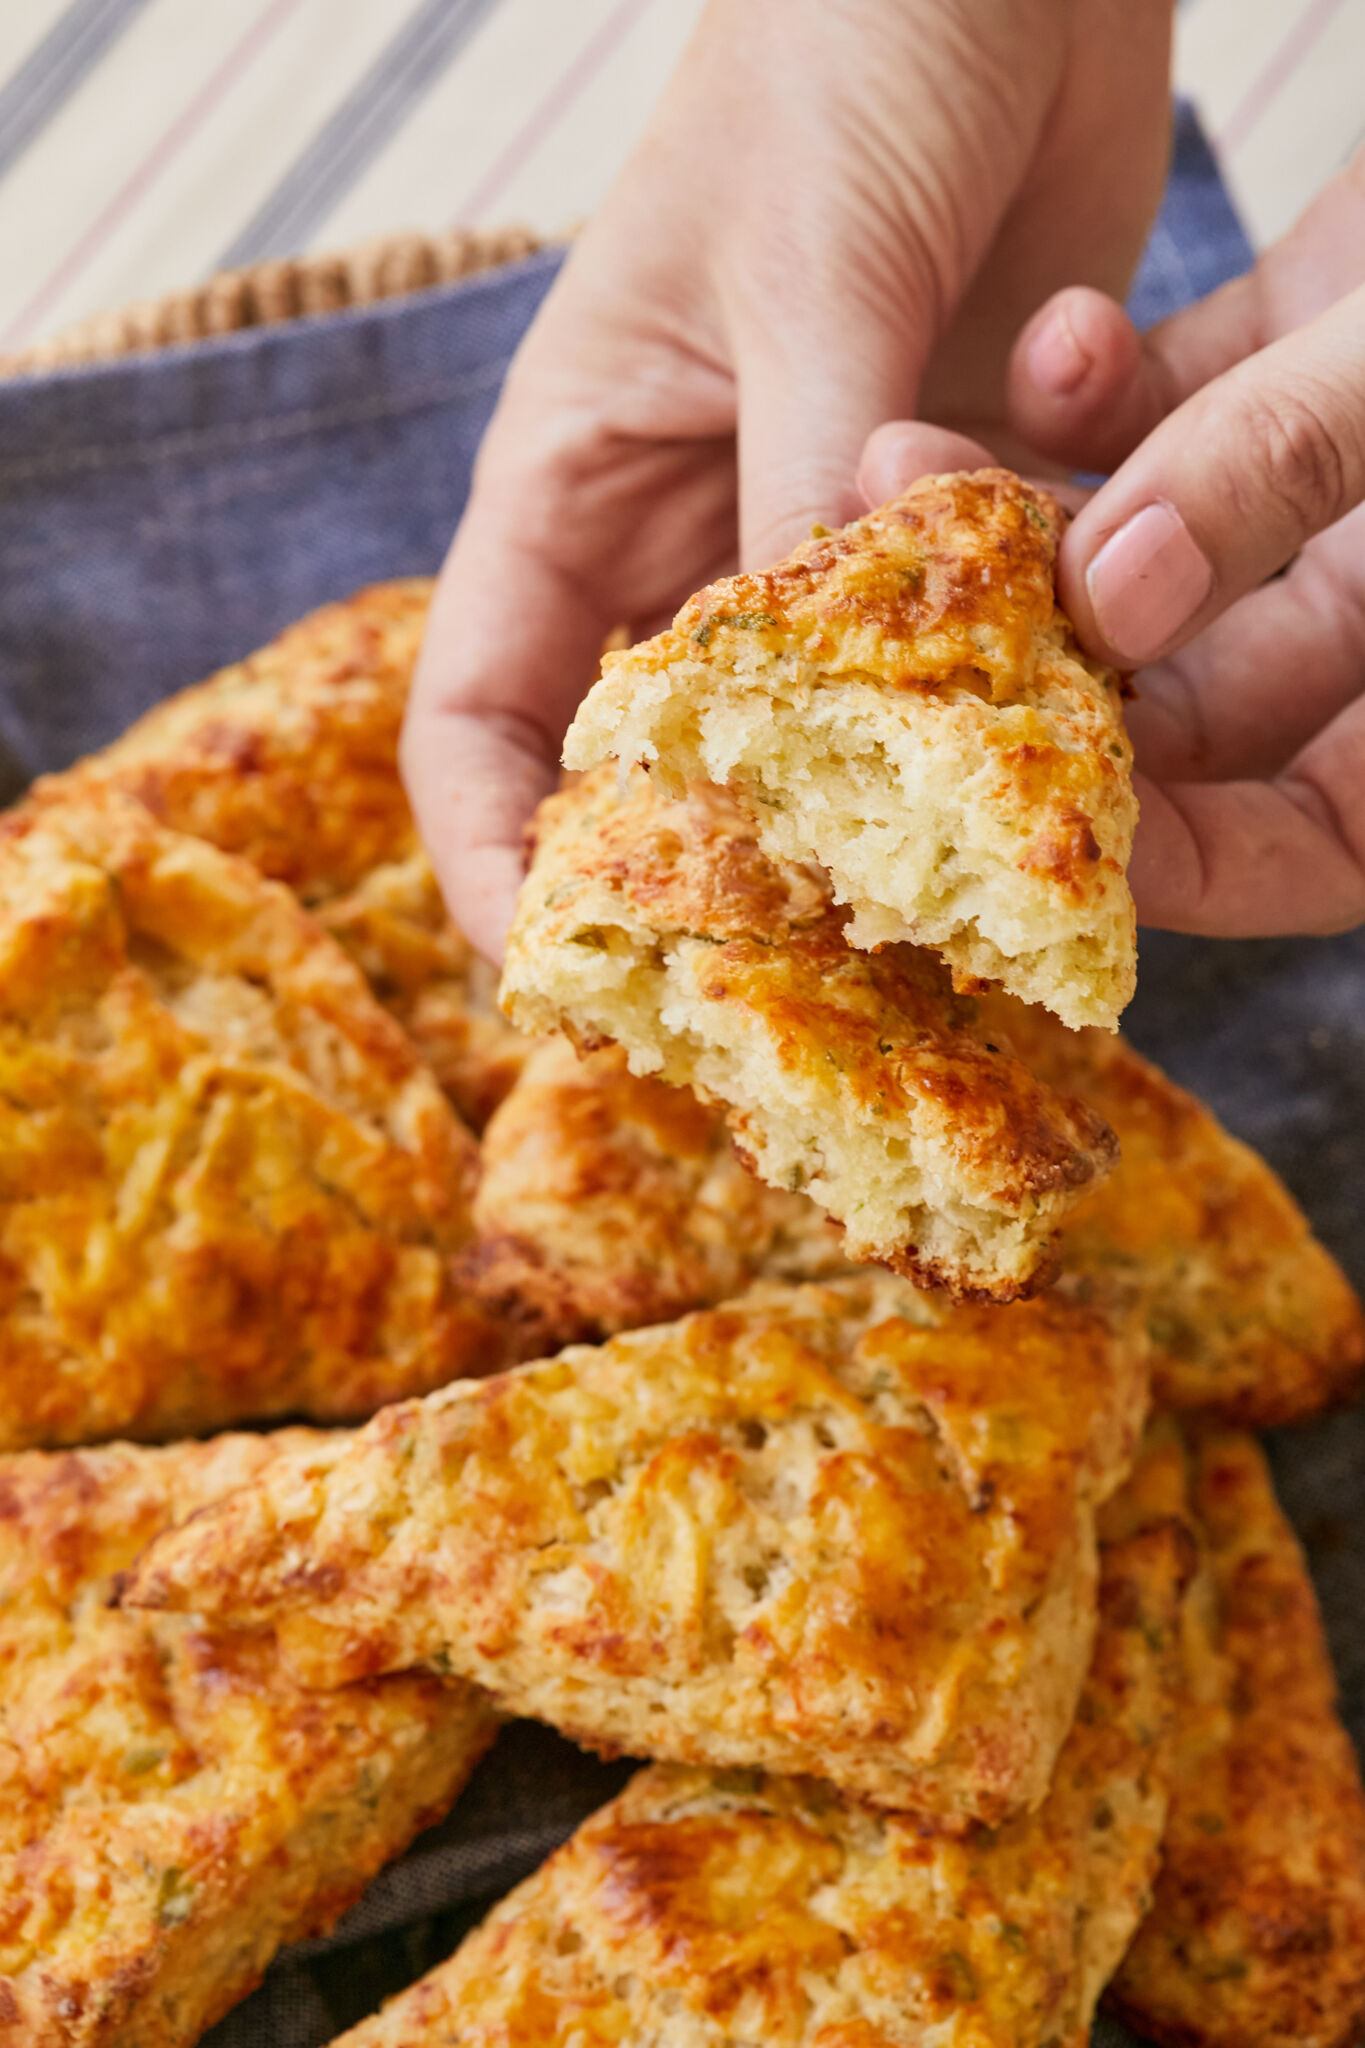 Apple Sage and Cheddar Scones are placed on a blue towel in a basket. They are baked to perfection with gorgeous golden brown color and crispy exterior all around with a crumbly, moist soft interior. 